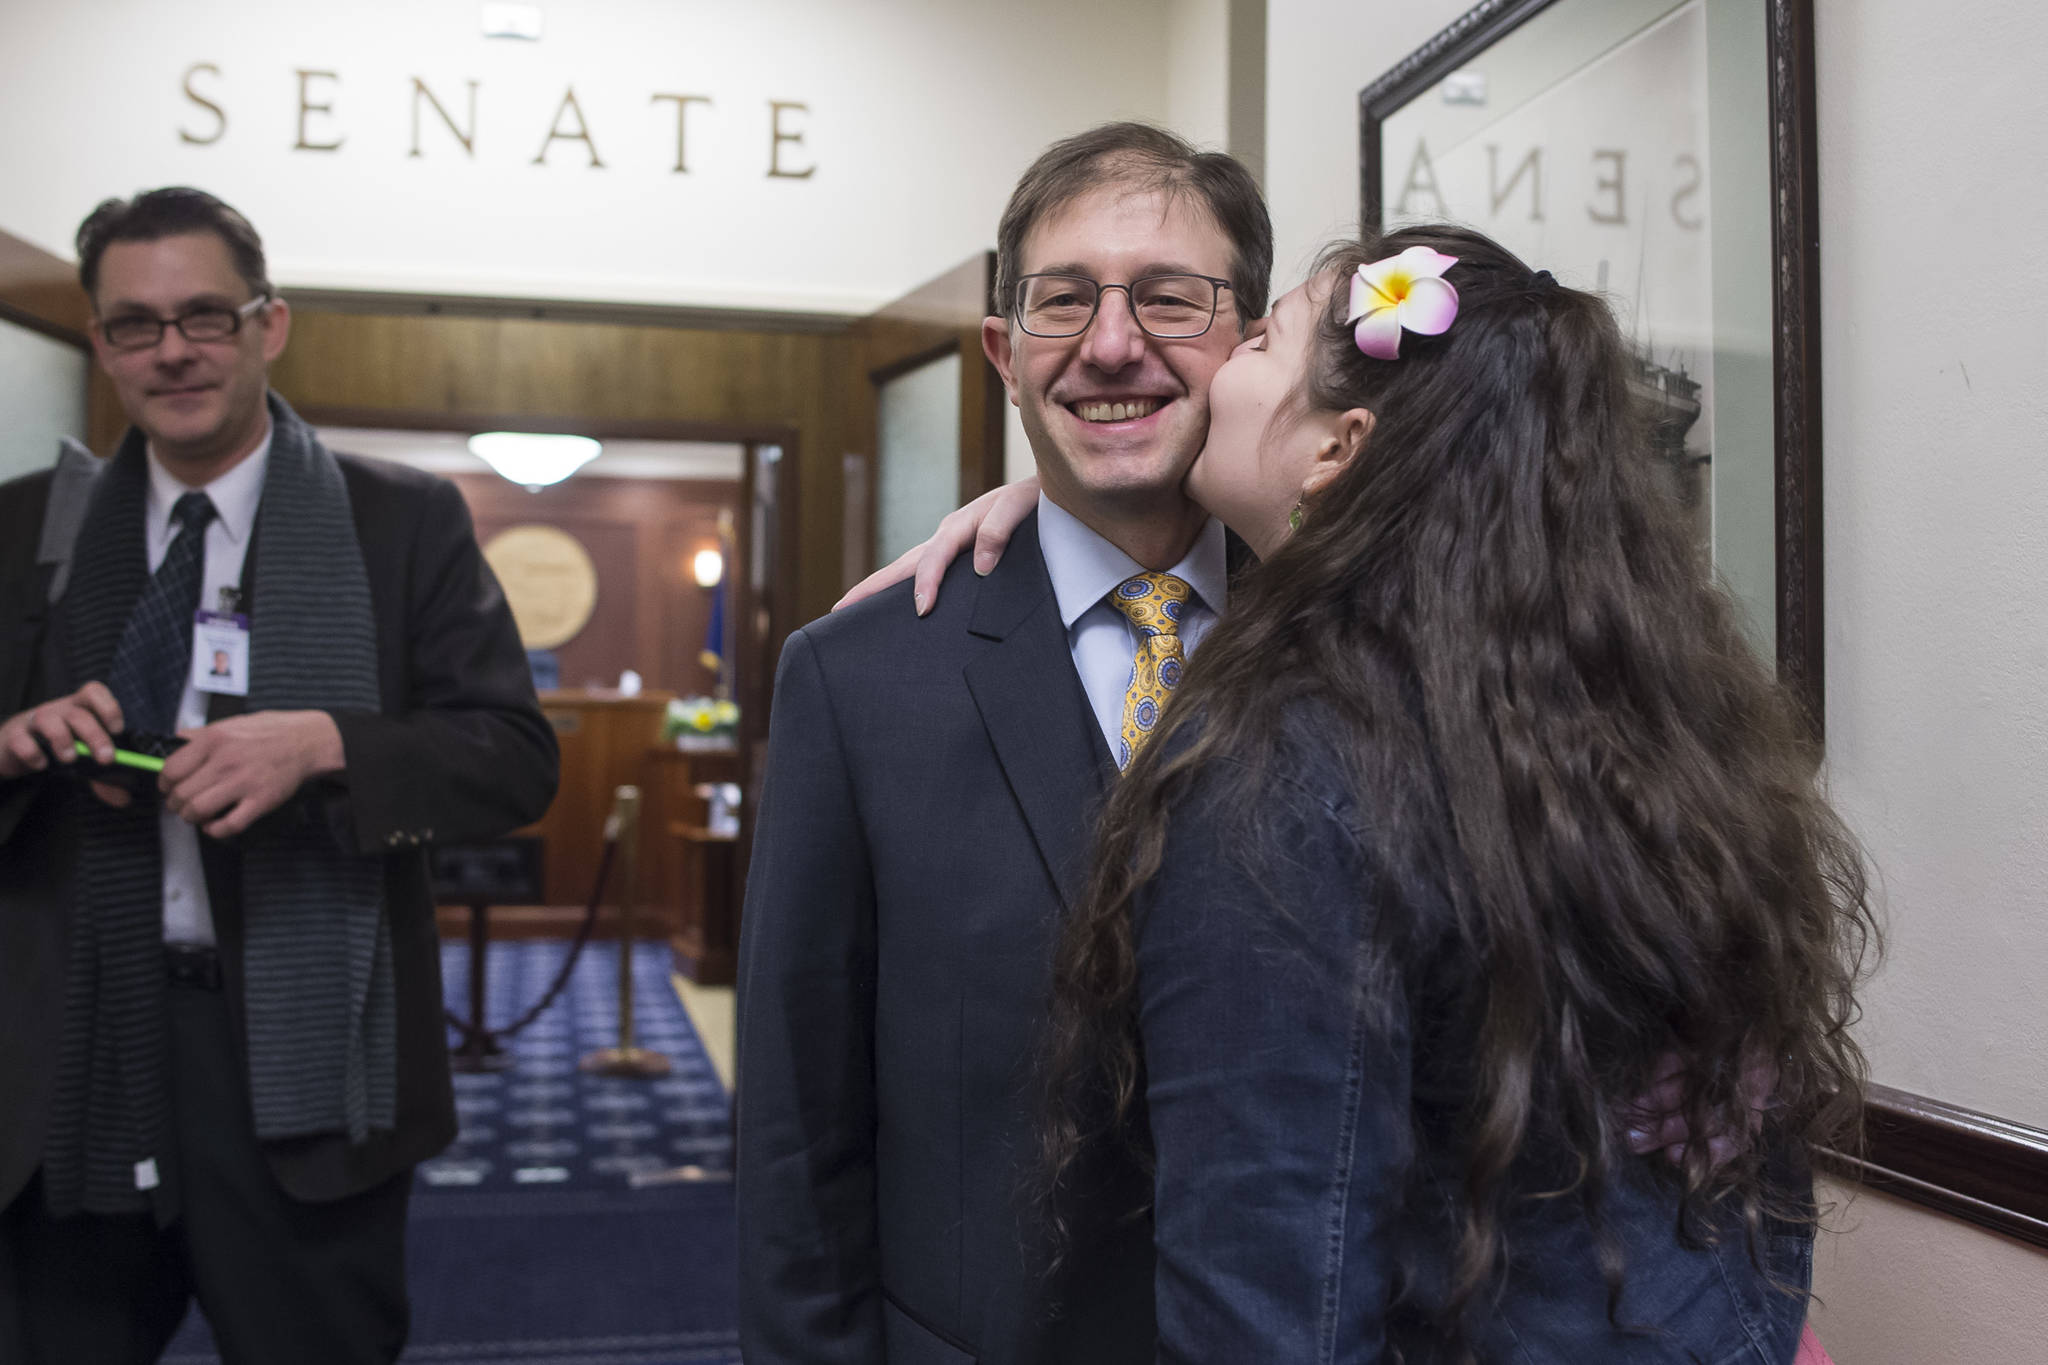 Sen. Jesse Kiehl, D-Juneau, receives a kiss from his daughter, Adara, before Kiehl is sworn in on the first day of the 31st Session of the Alaska Legislature on Tuesday, Jan. 15, 2019. (Michael Penn | Juneau Empire)